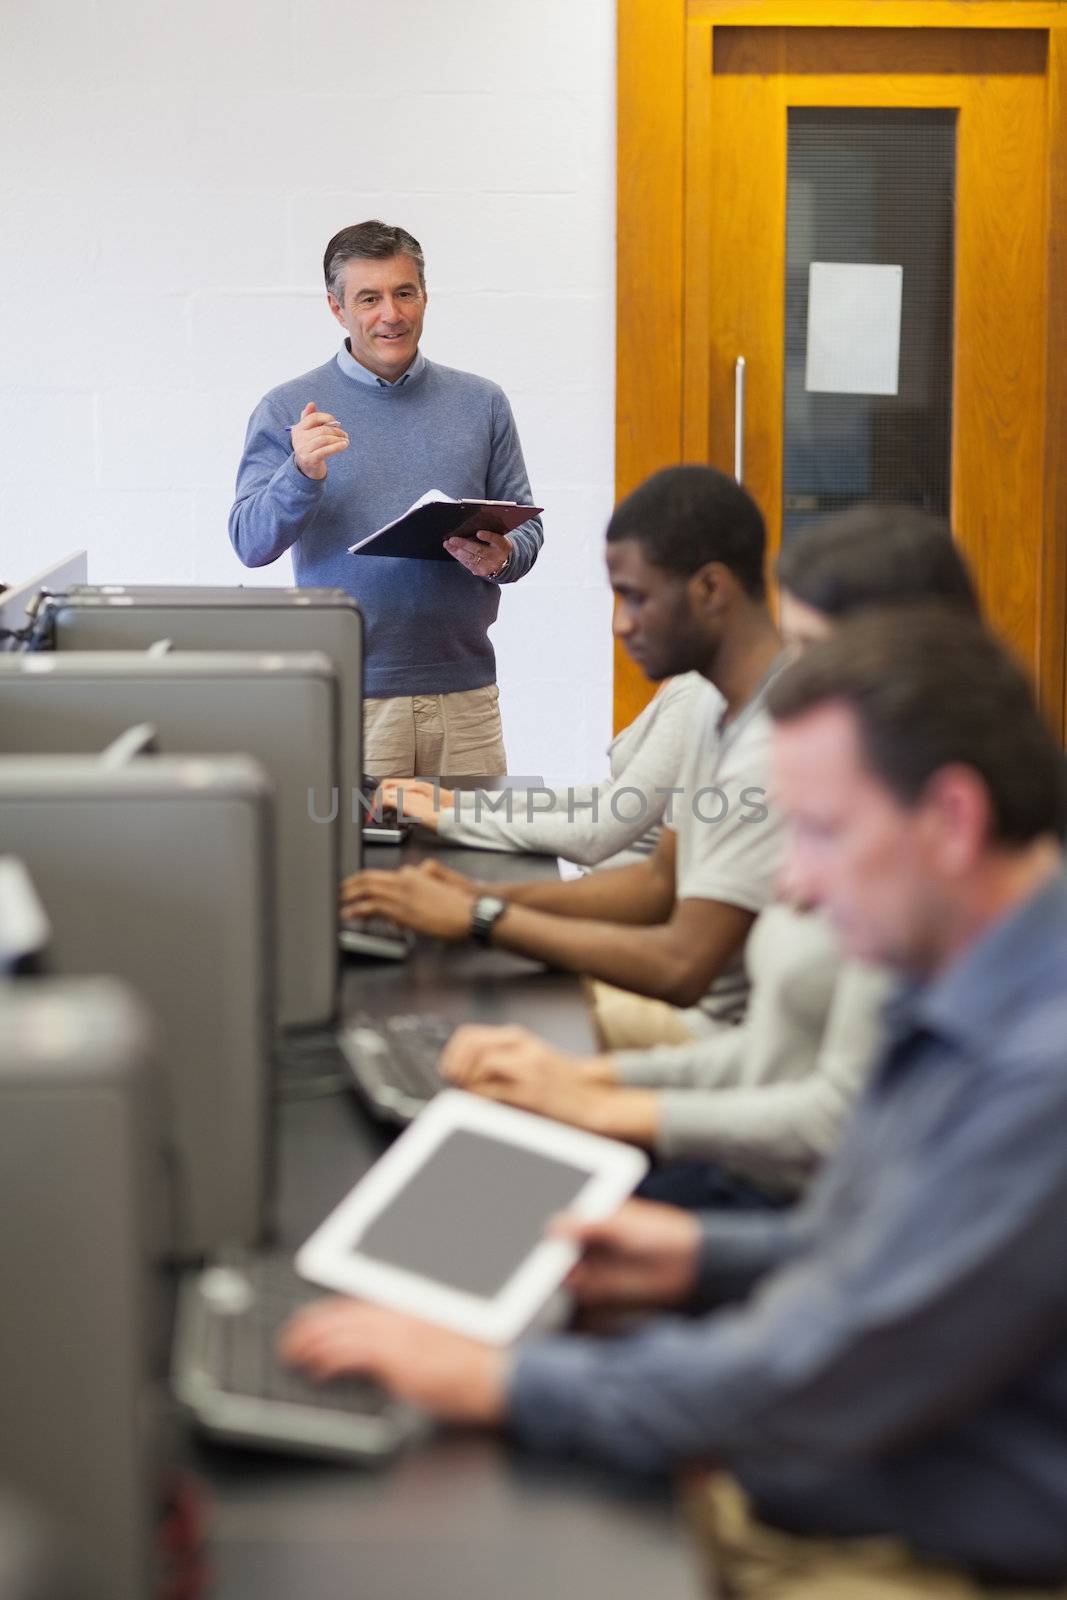 Teacher talking to his computer class holding a clipboard in college